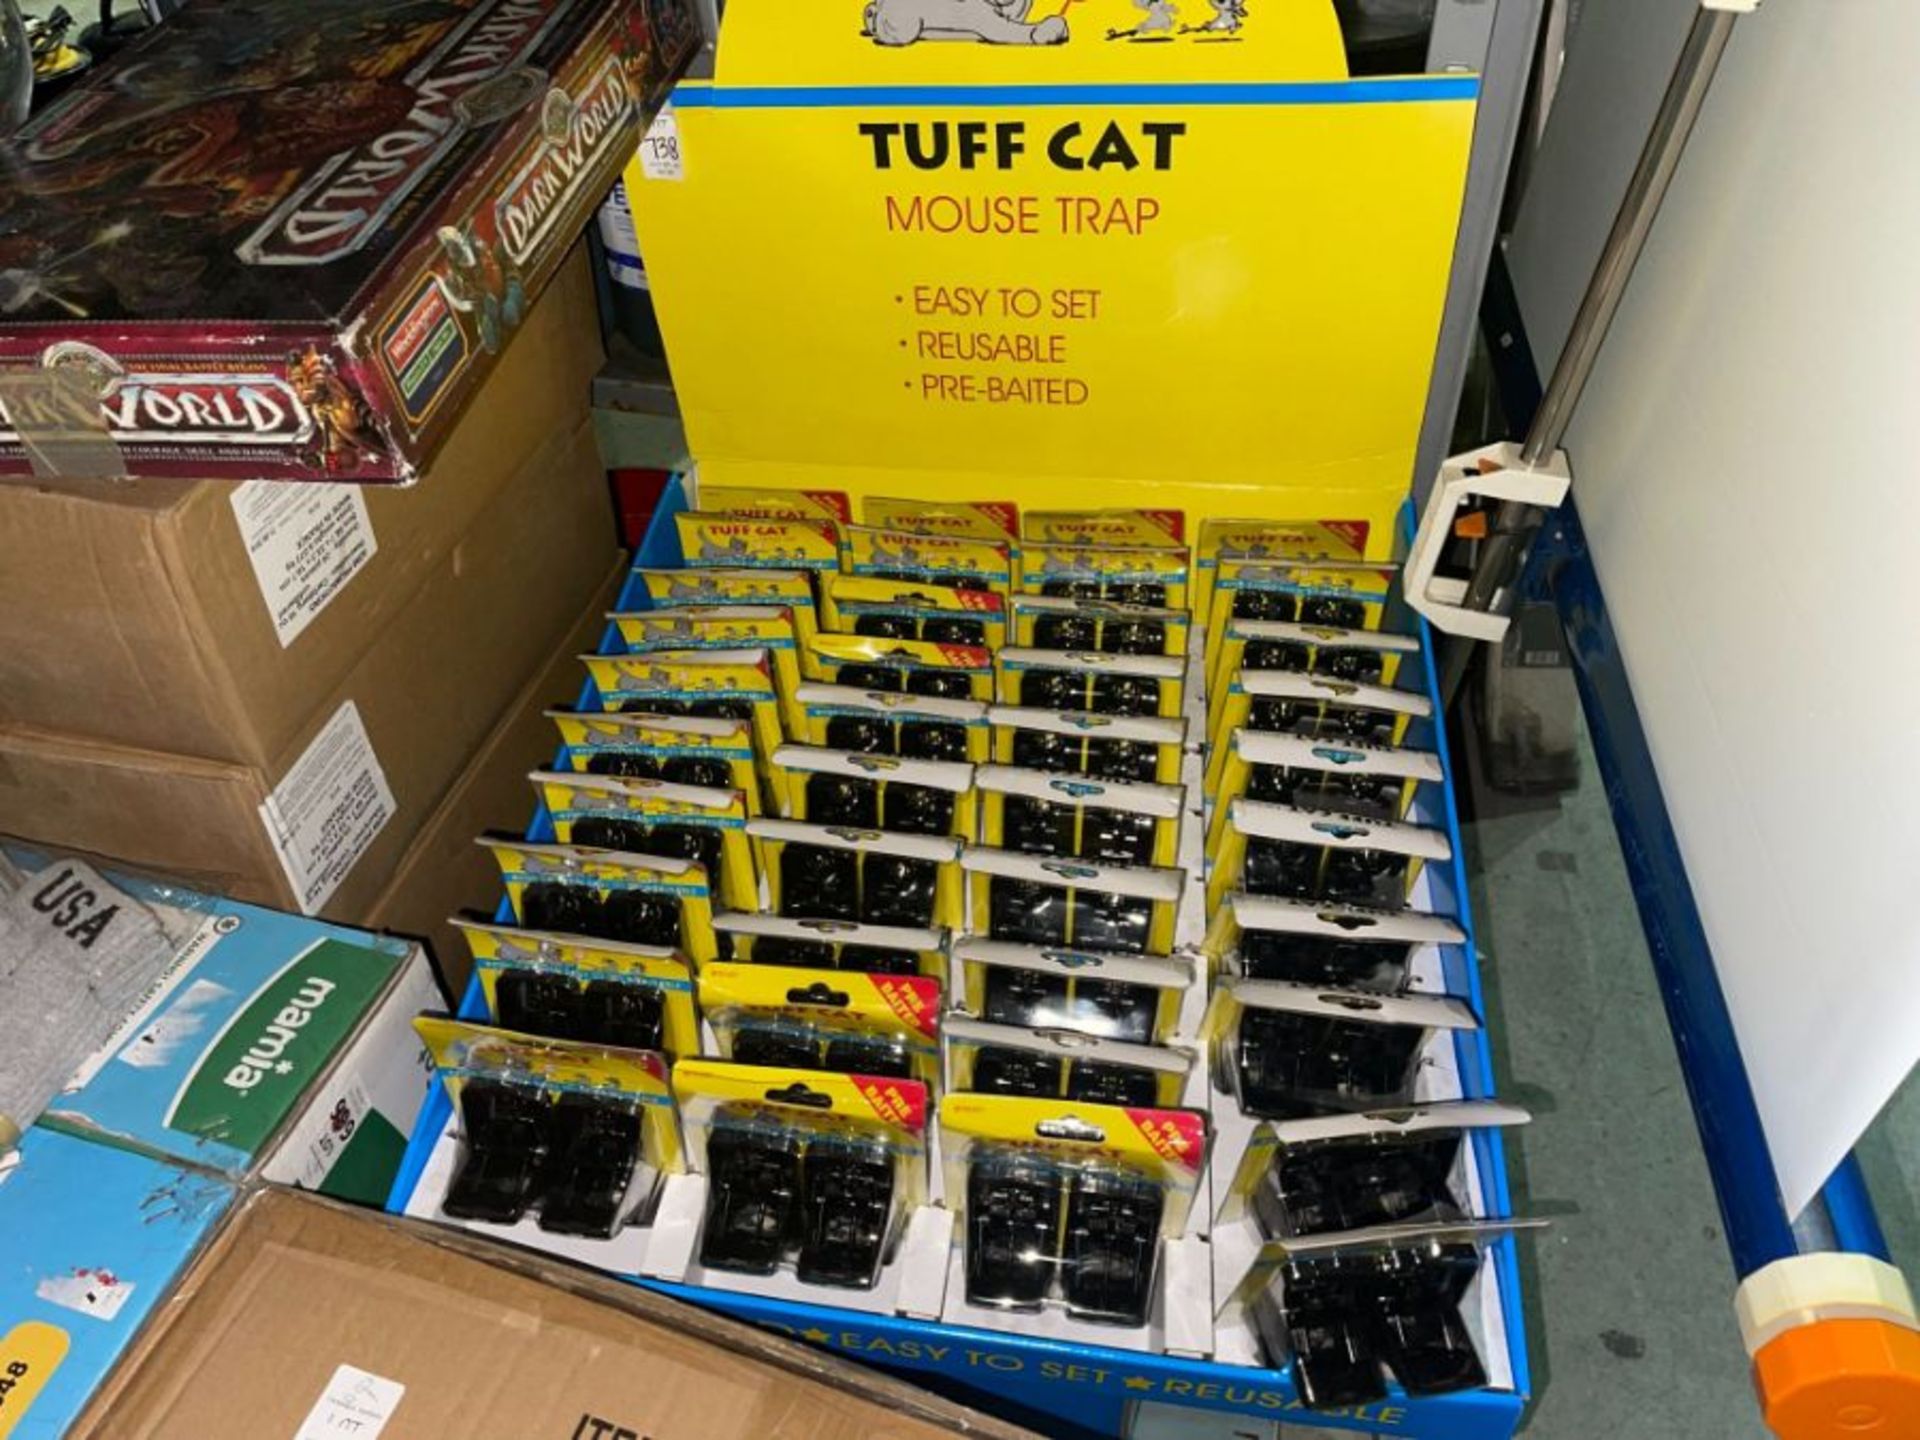 40X PACKS OF 2X TUFF CAT MOUSE TRAPS